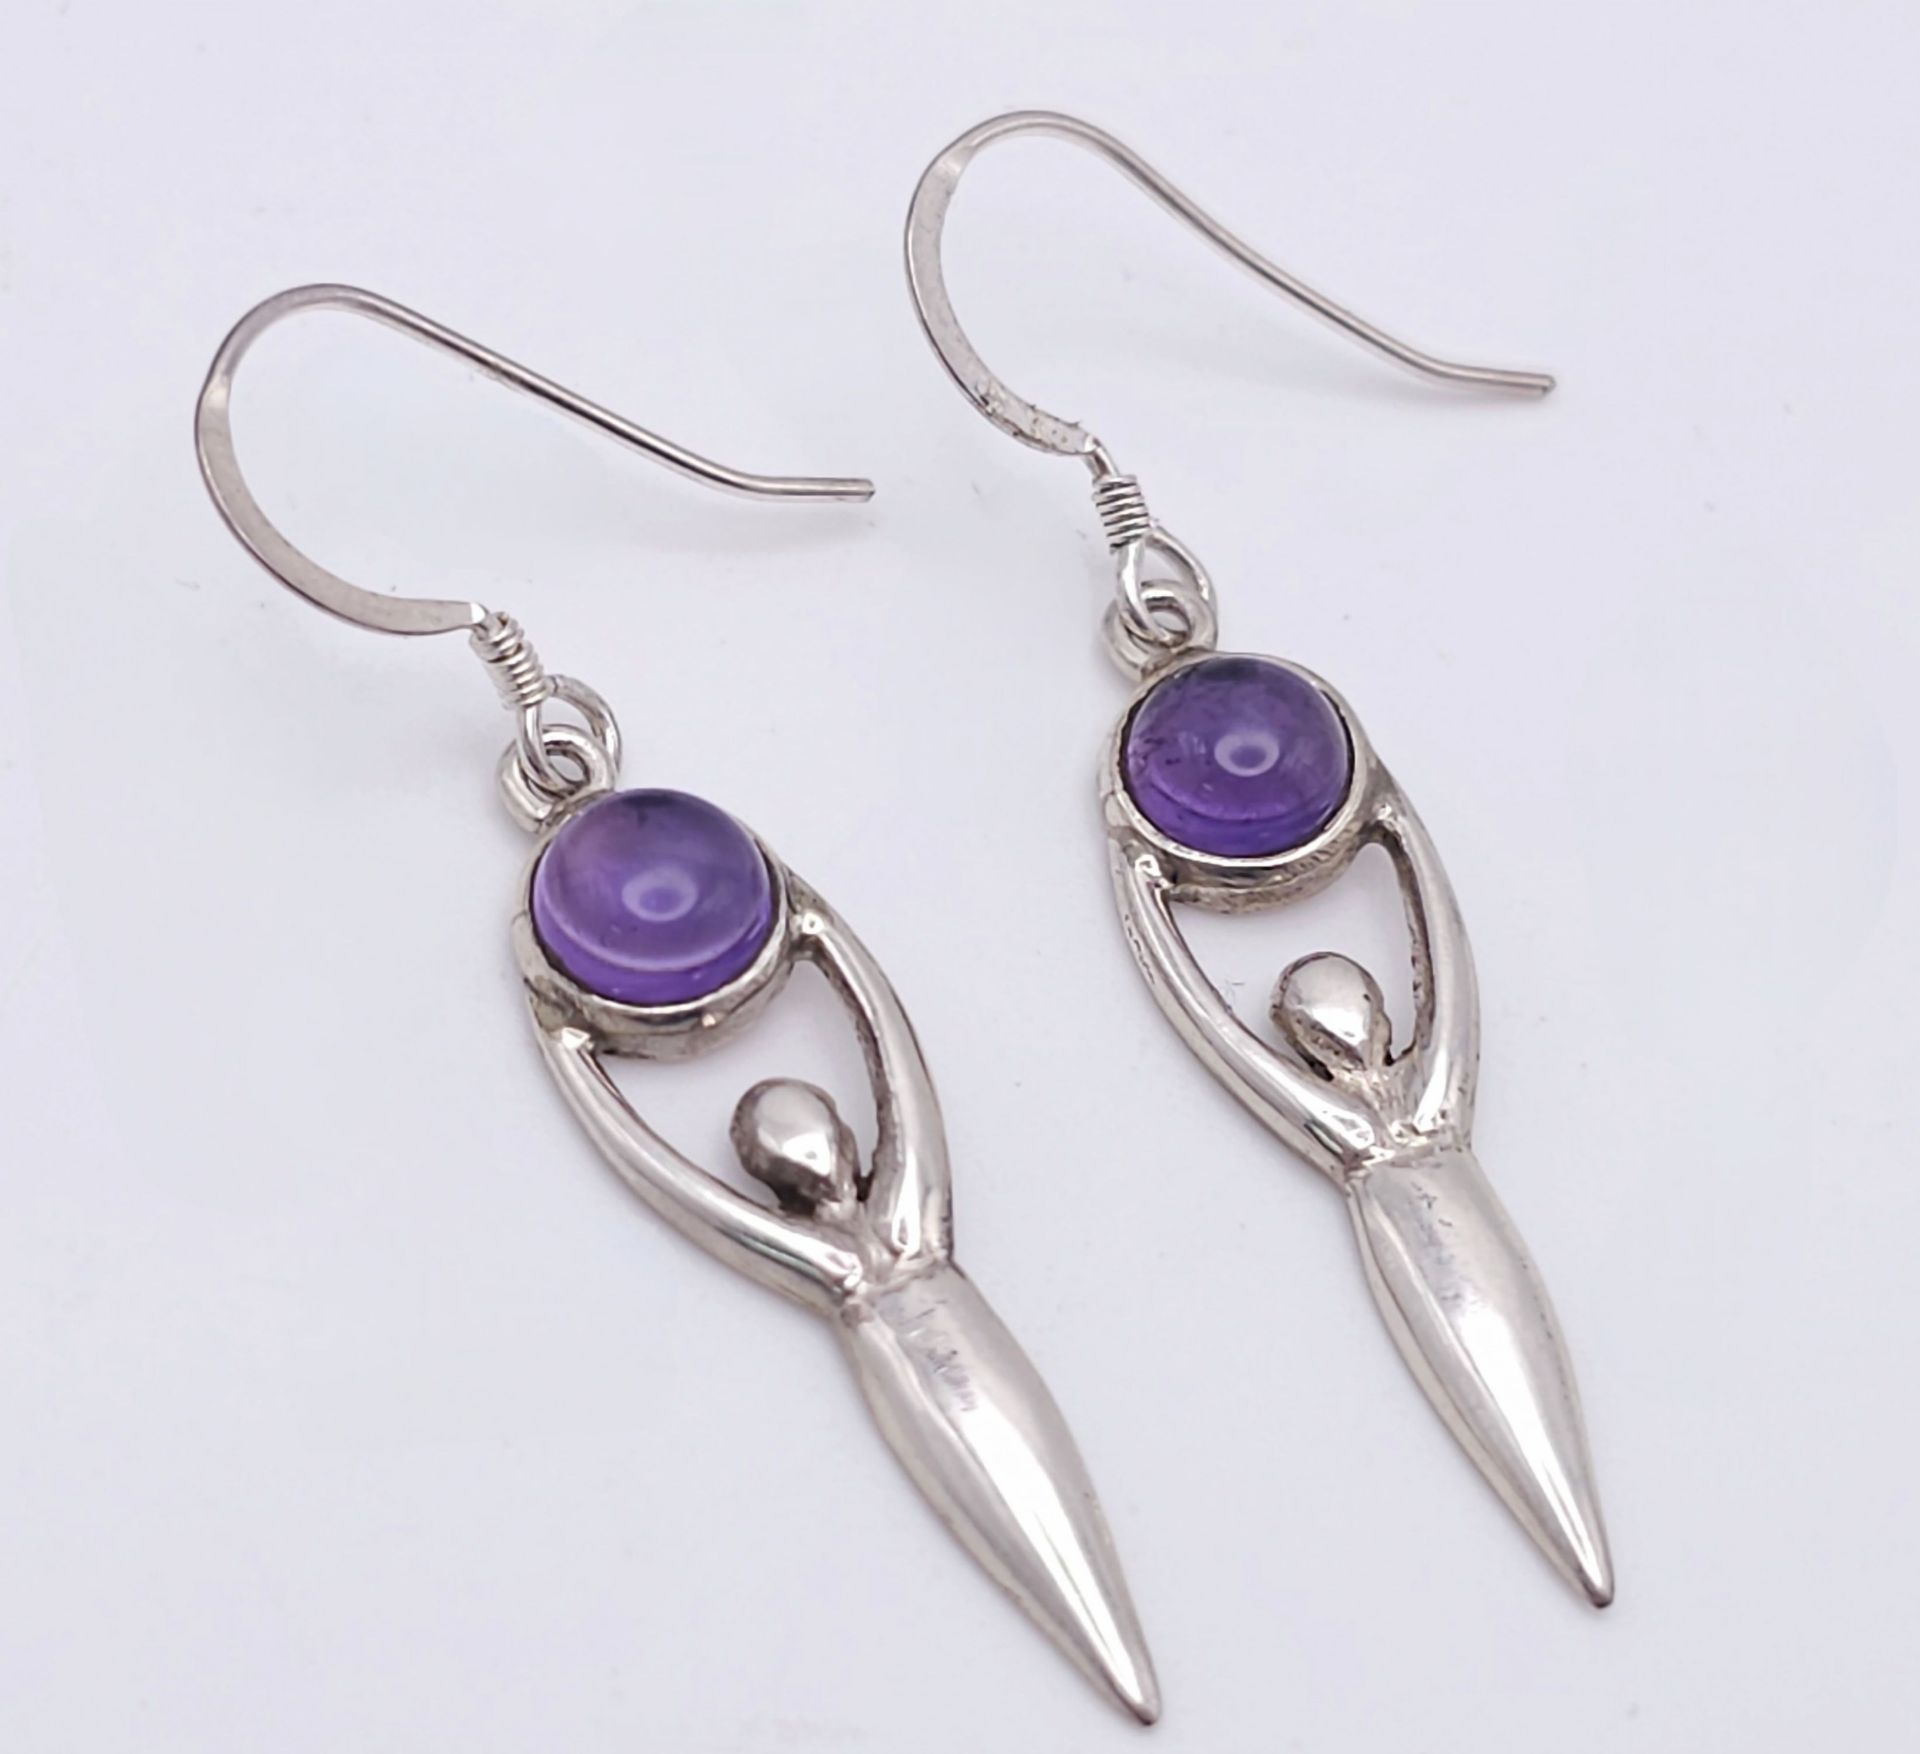 A Pair of Sterling Silver and Amethyst Cabochon ‘Goddess’ Earrings. 4.5cm Drop. Set with 6mm Round